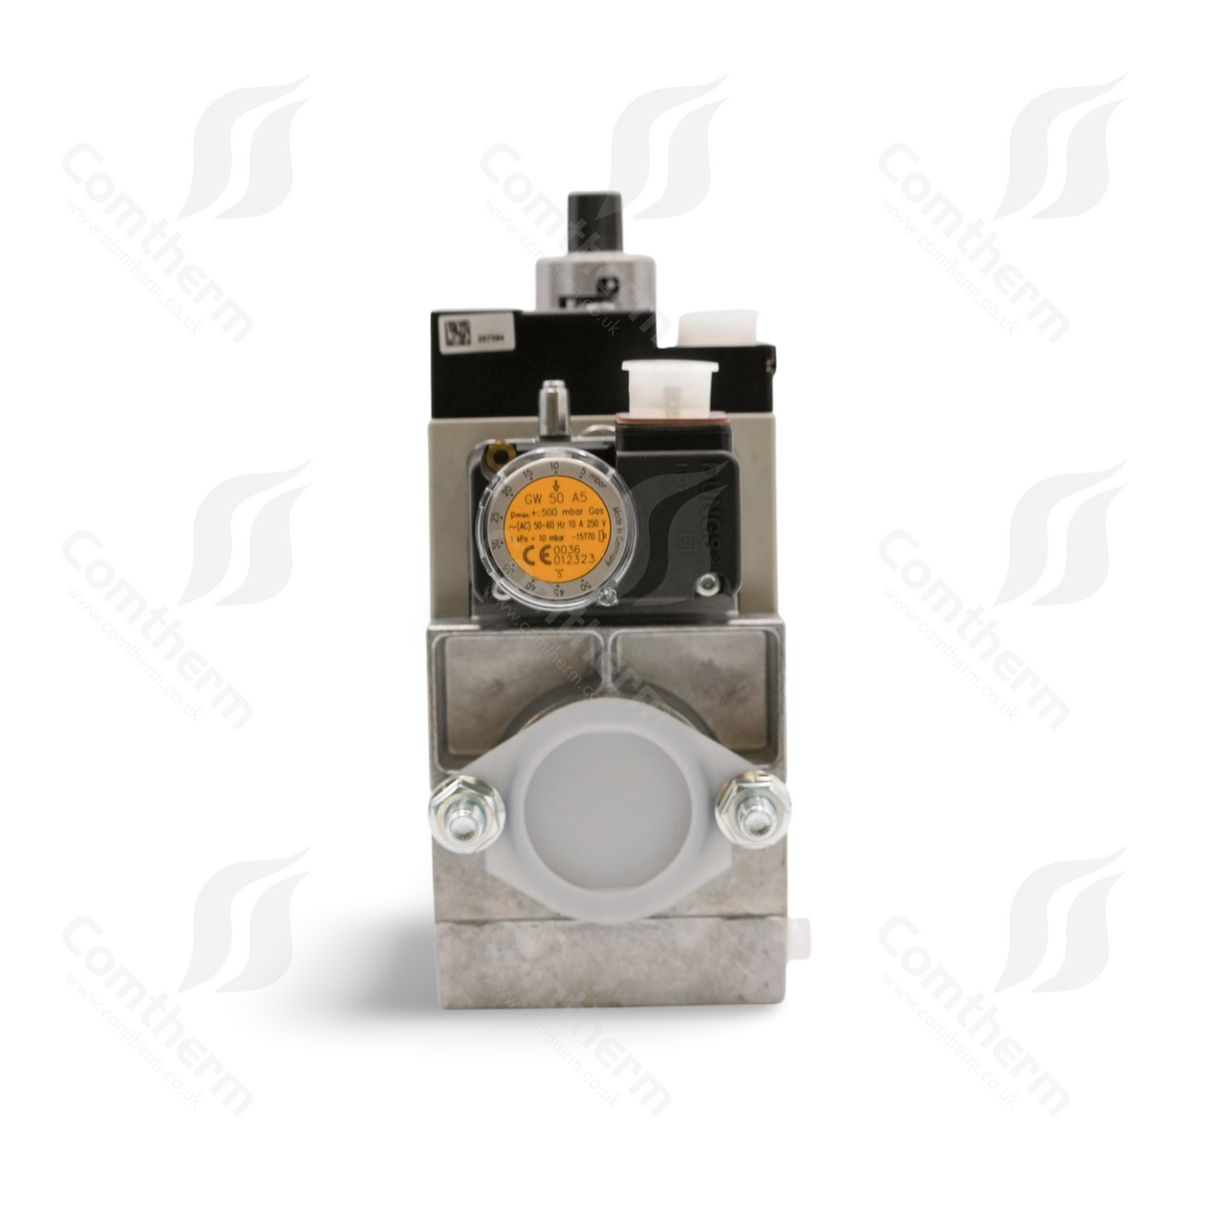 Dungs MB-DLE 412 B01 S52 + GW150A5 Multibloc Gas Valve - 230v